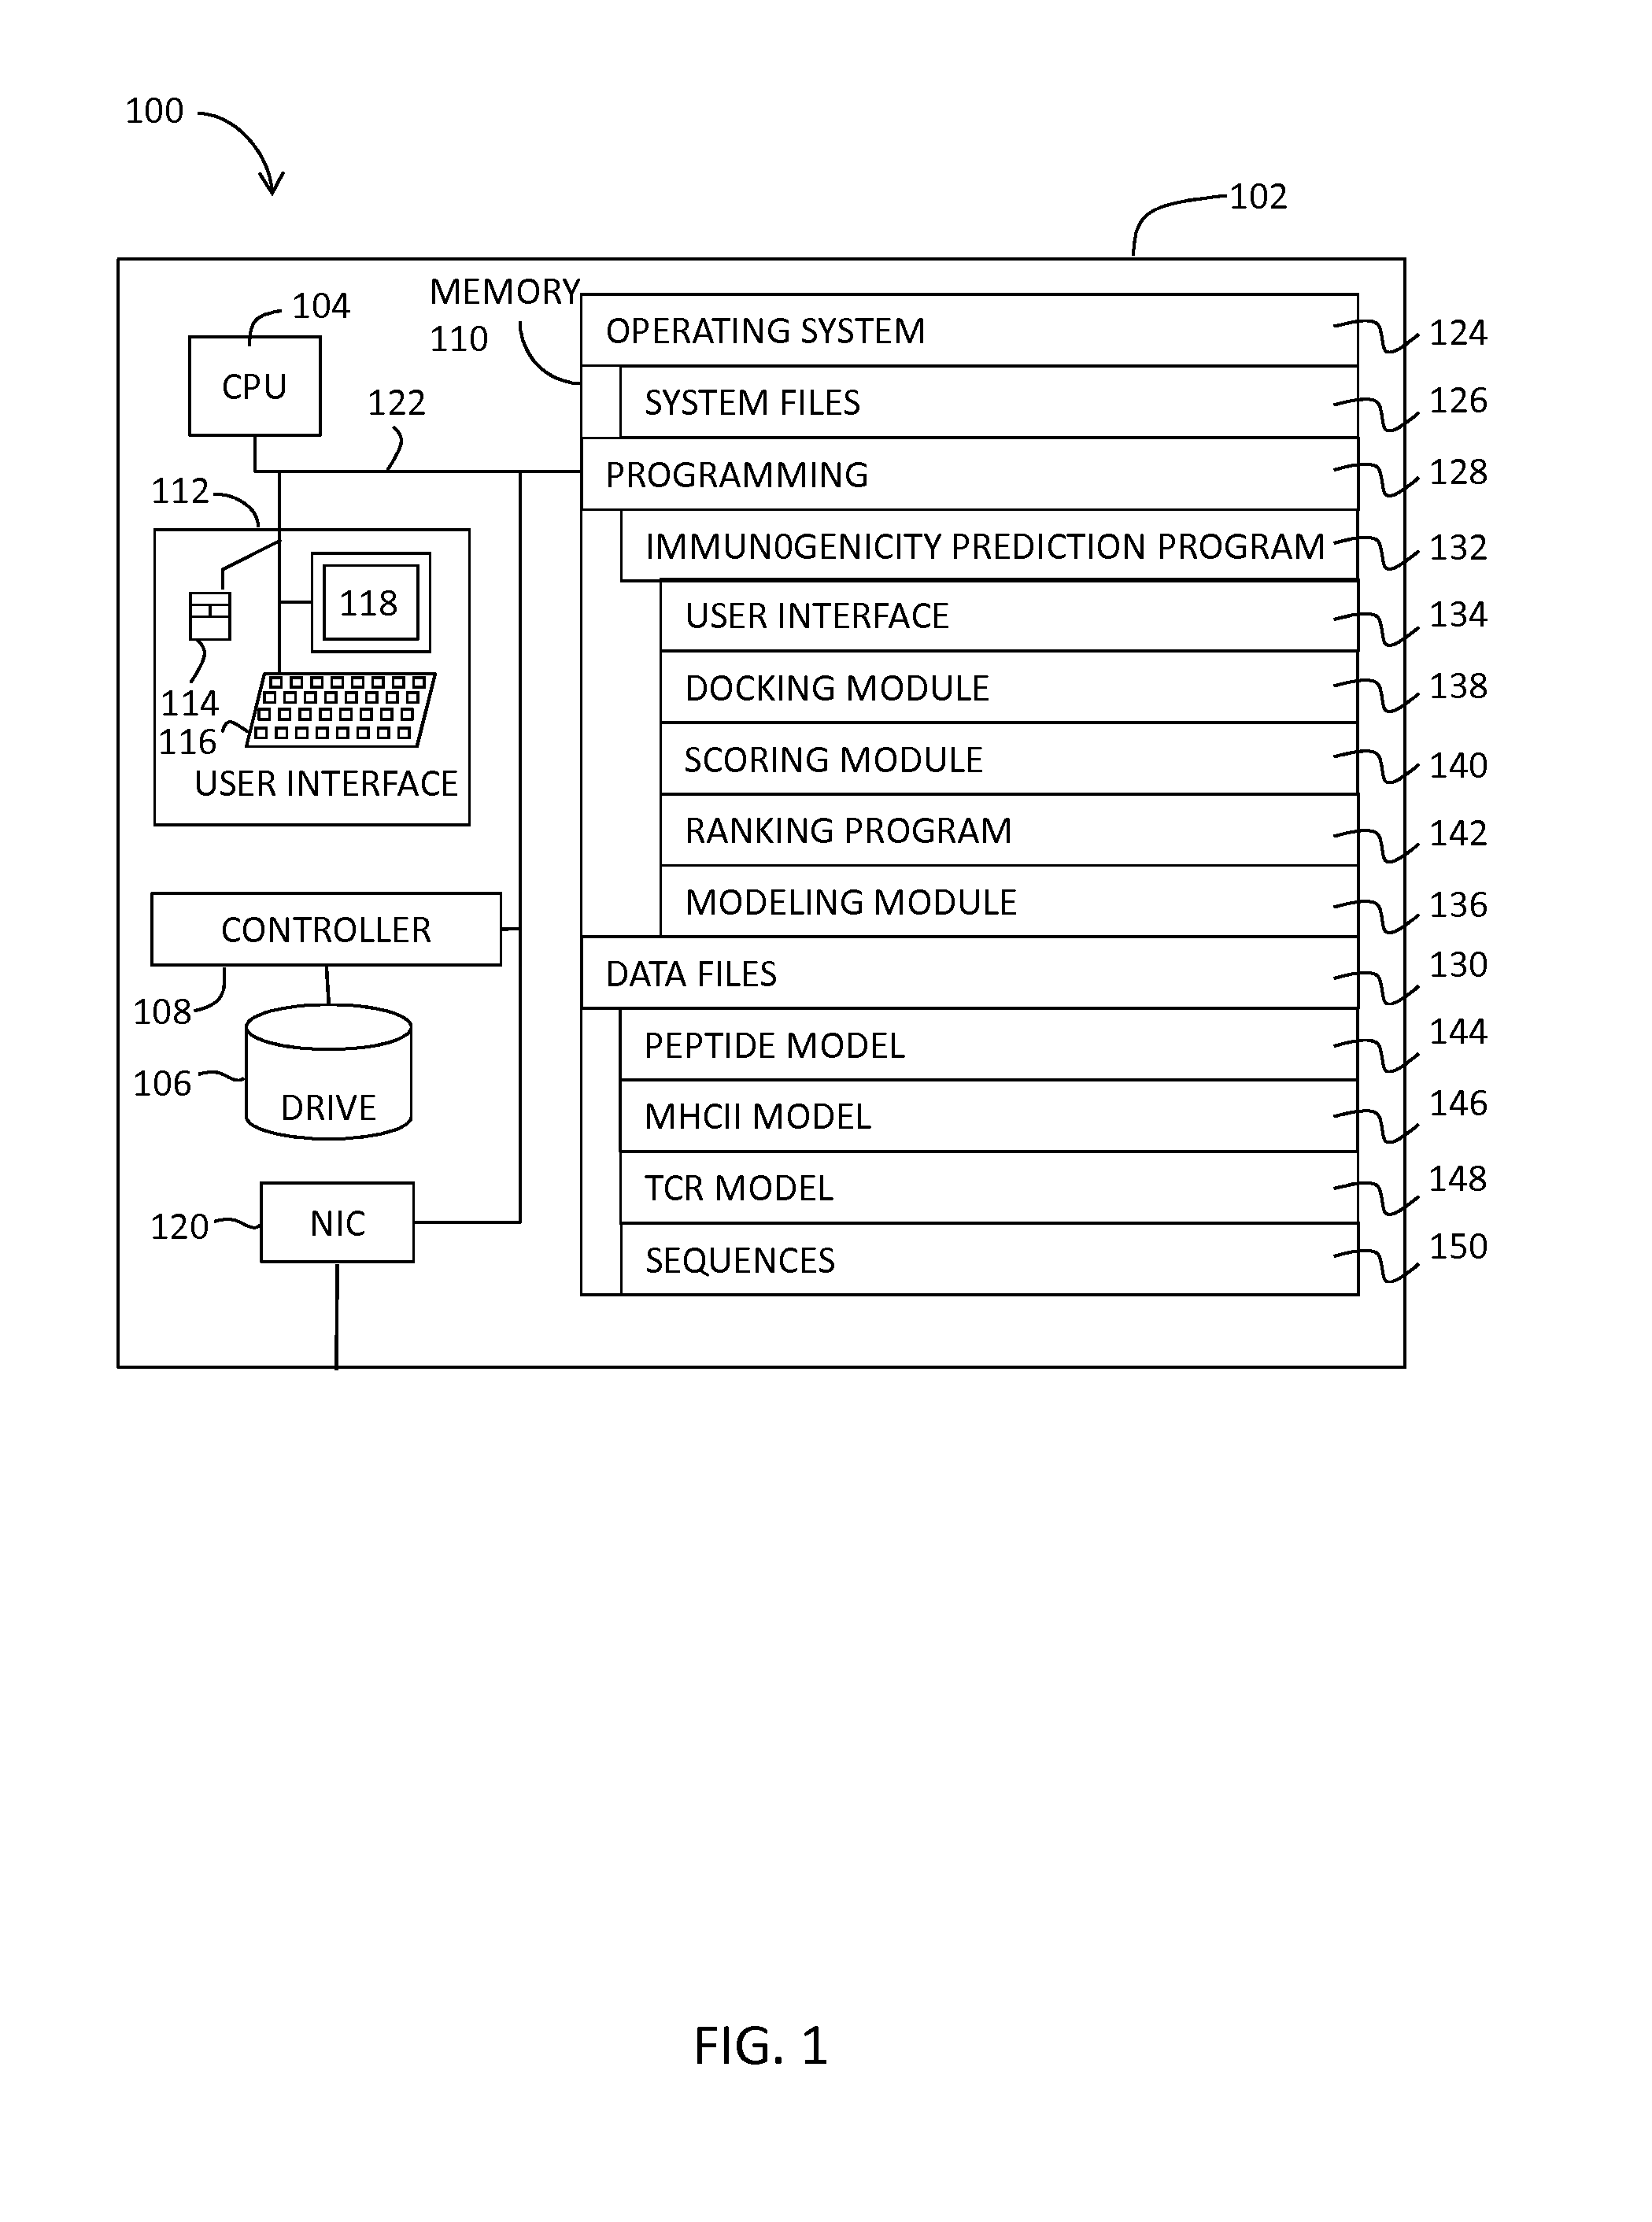 System and Method for Predicting the Immunogenicity of a Peptide